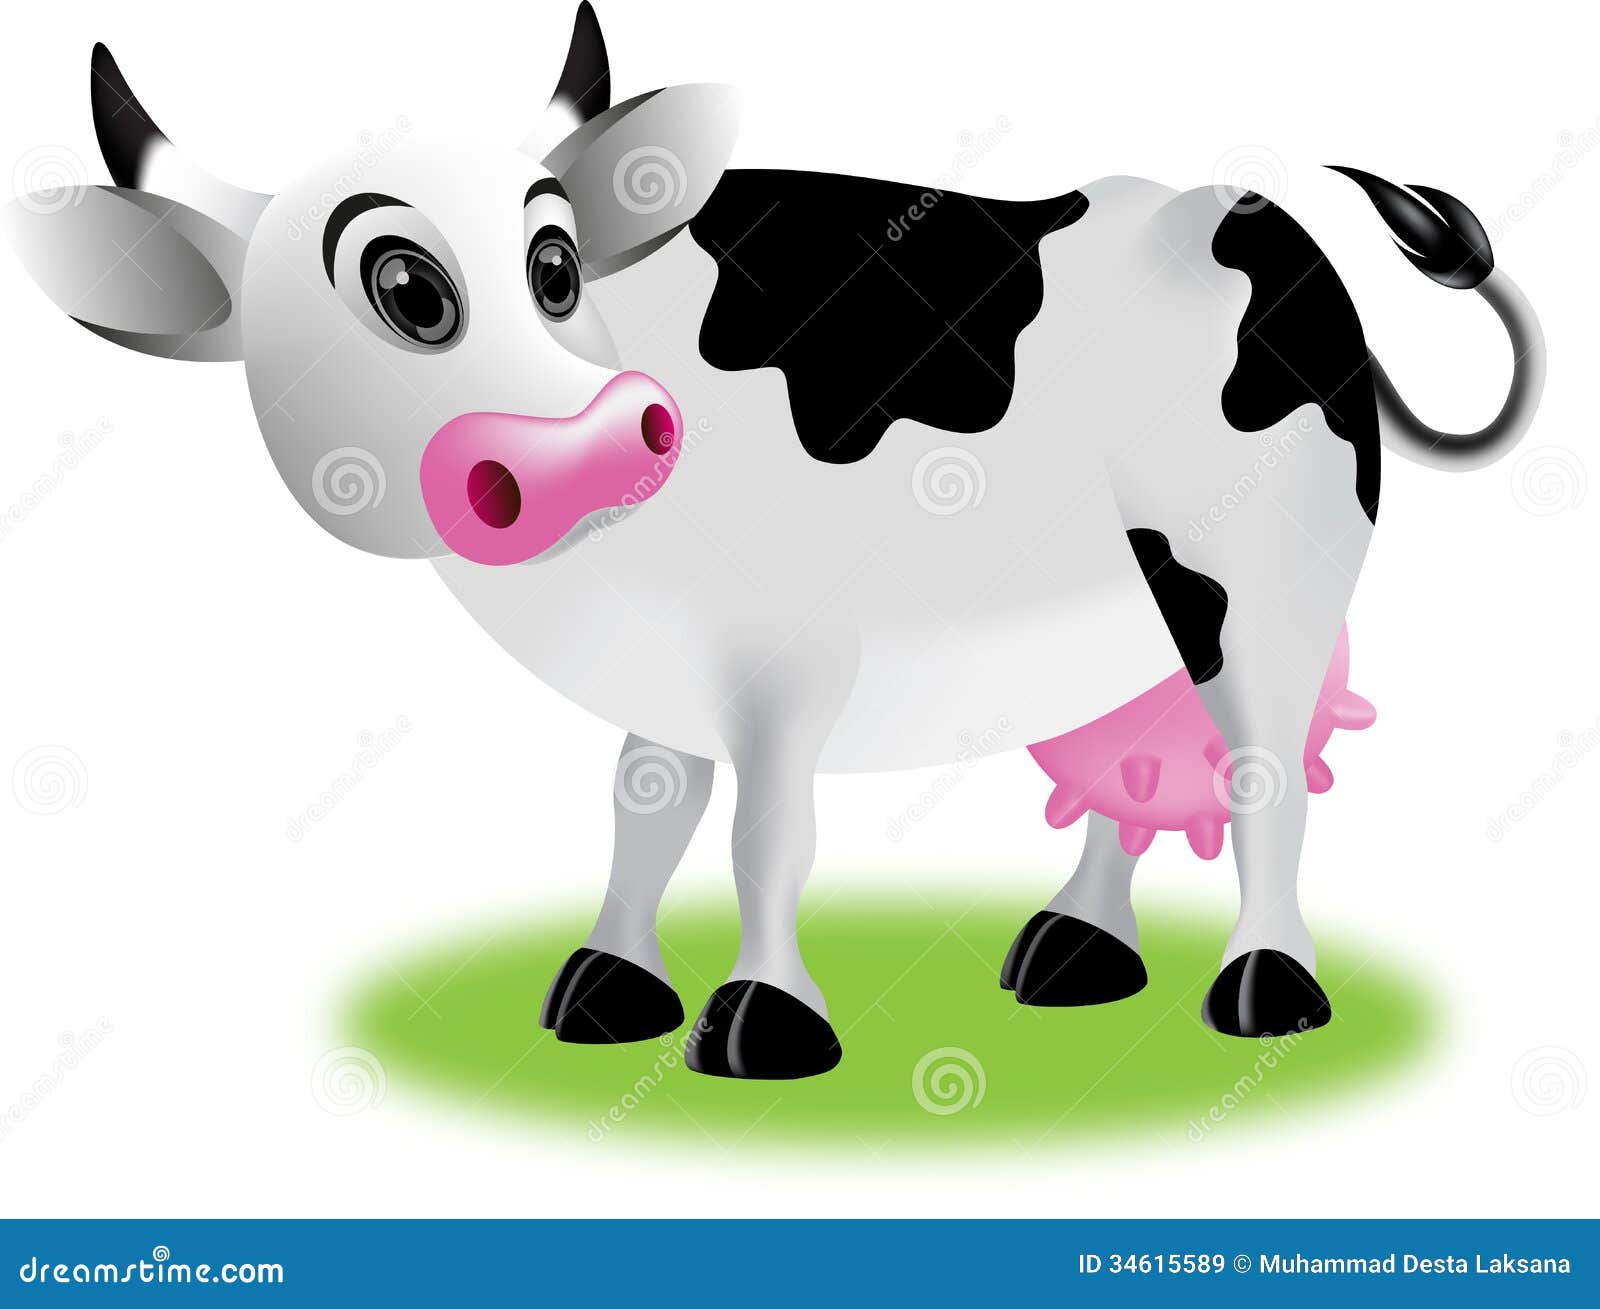 Cute Cartoon Cows with Heart Shaped Balloons